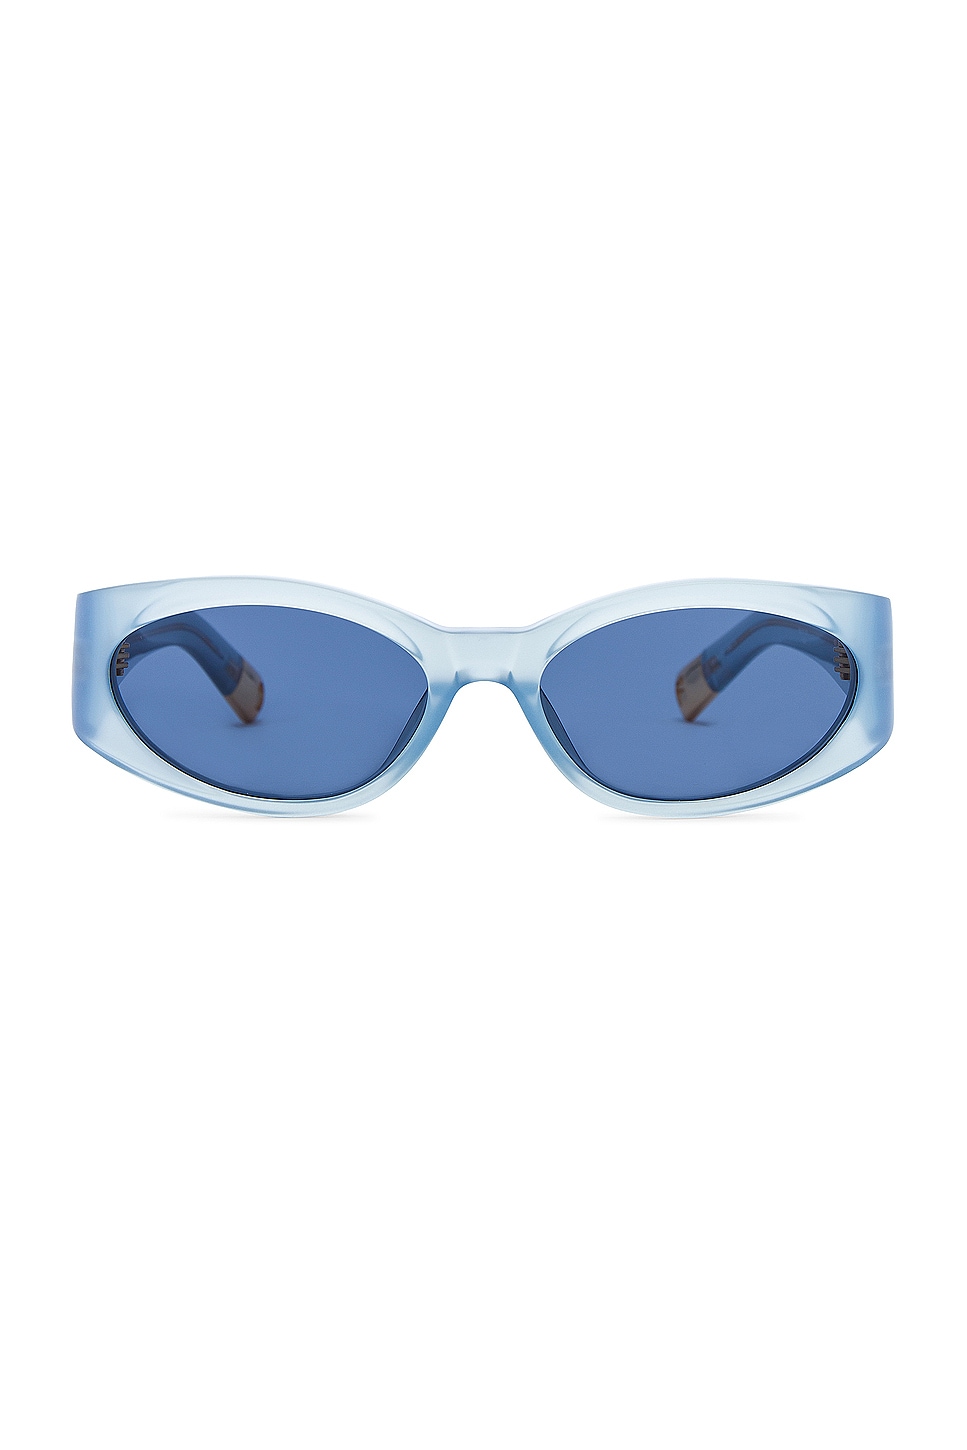 Les Lunettes Ovalo in Blue